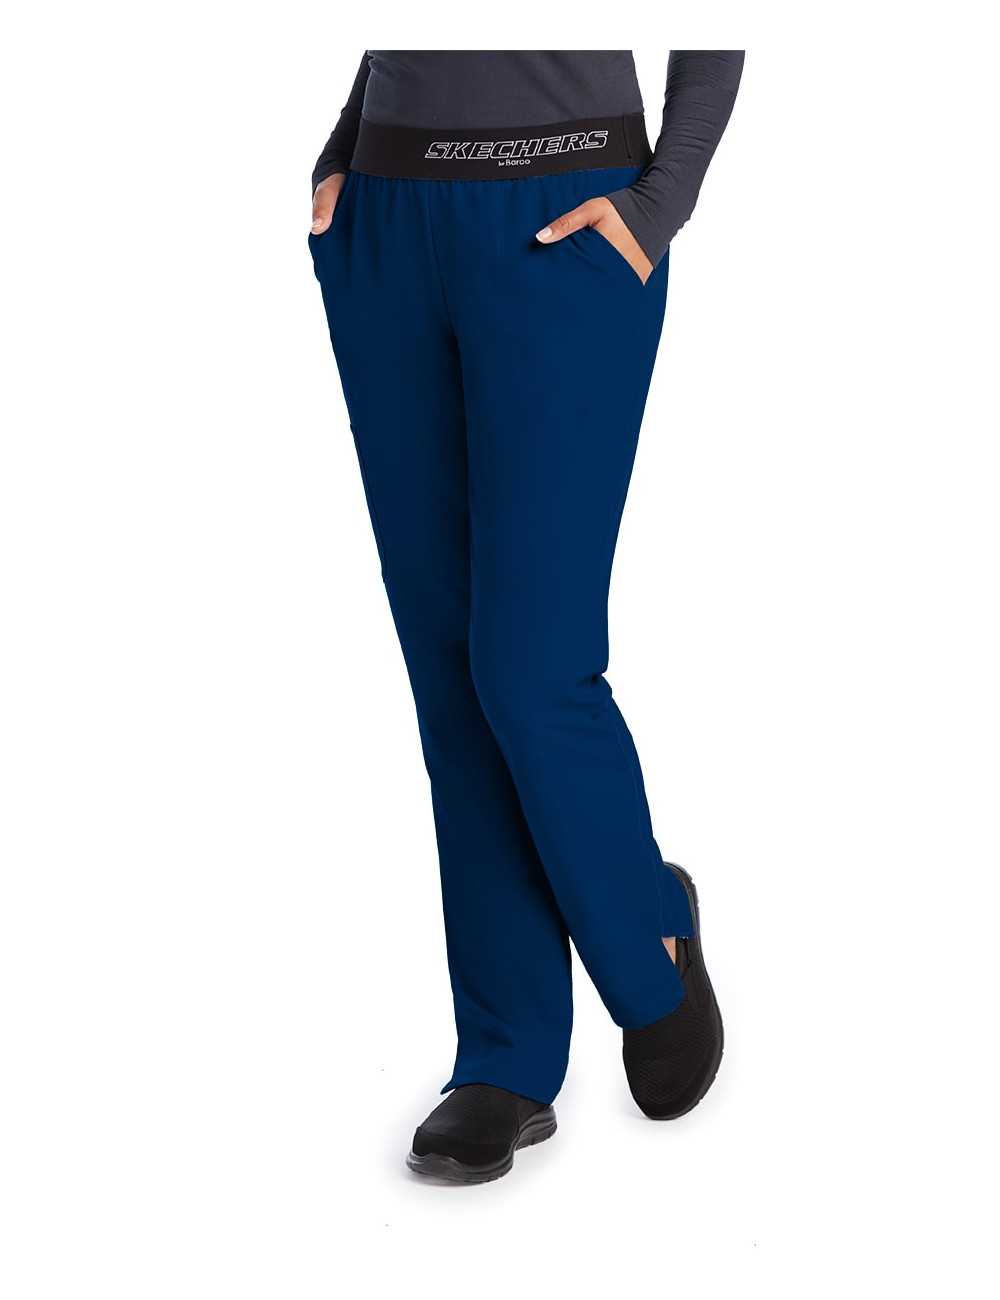 https://www.mankaia.com/14699-zoom_product/women-s-medical-trousers-skechers-collection-sk202-.jpg